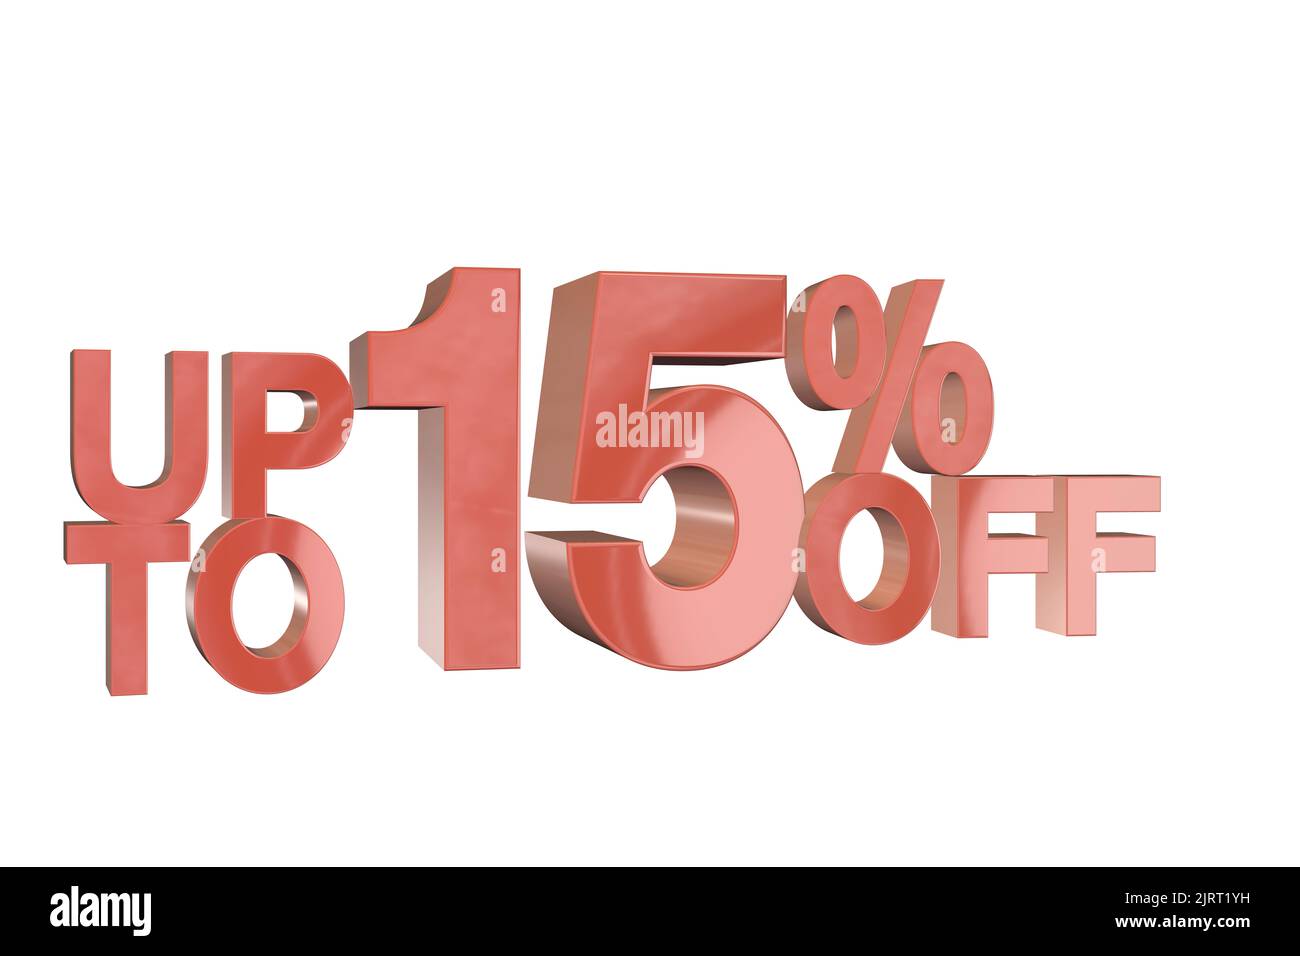 15% off banner sale sign 3D rendered discount banner marketing sign showing minus - up to upto 15% percent off Stock Photo